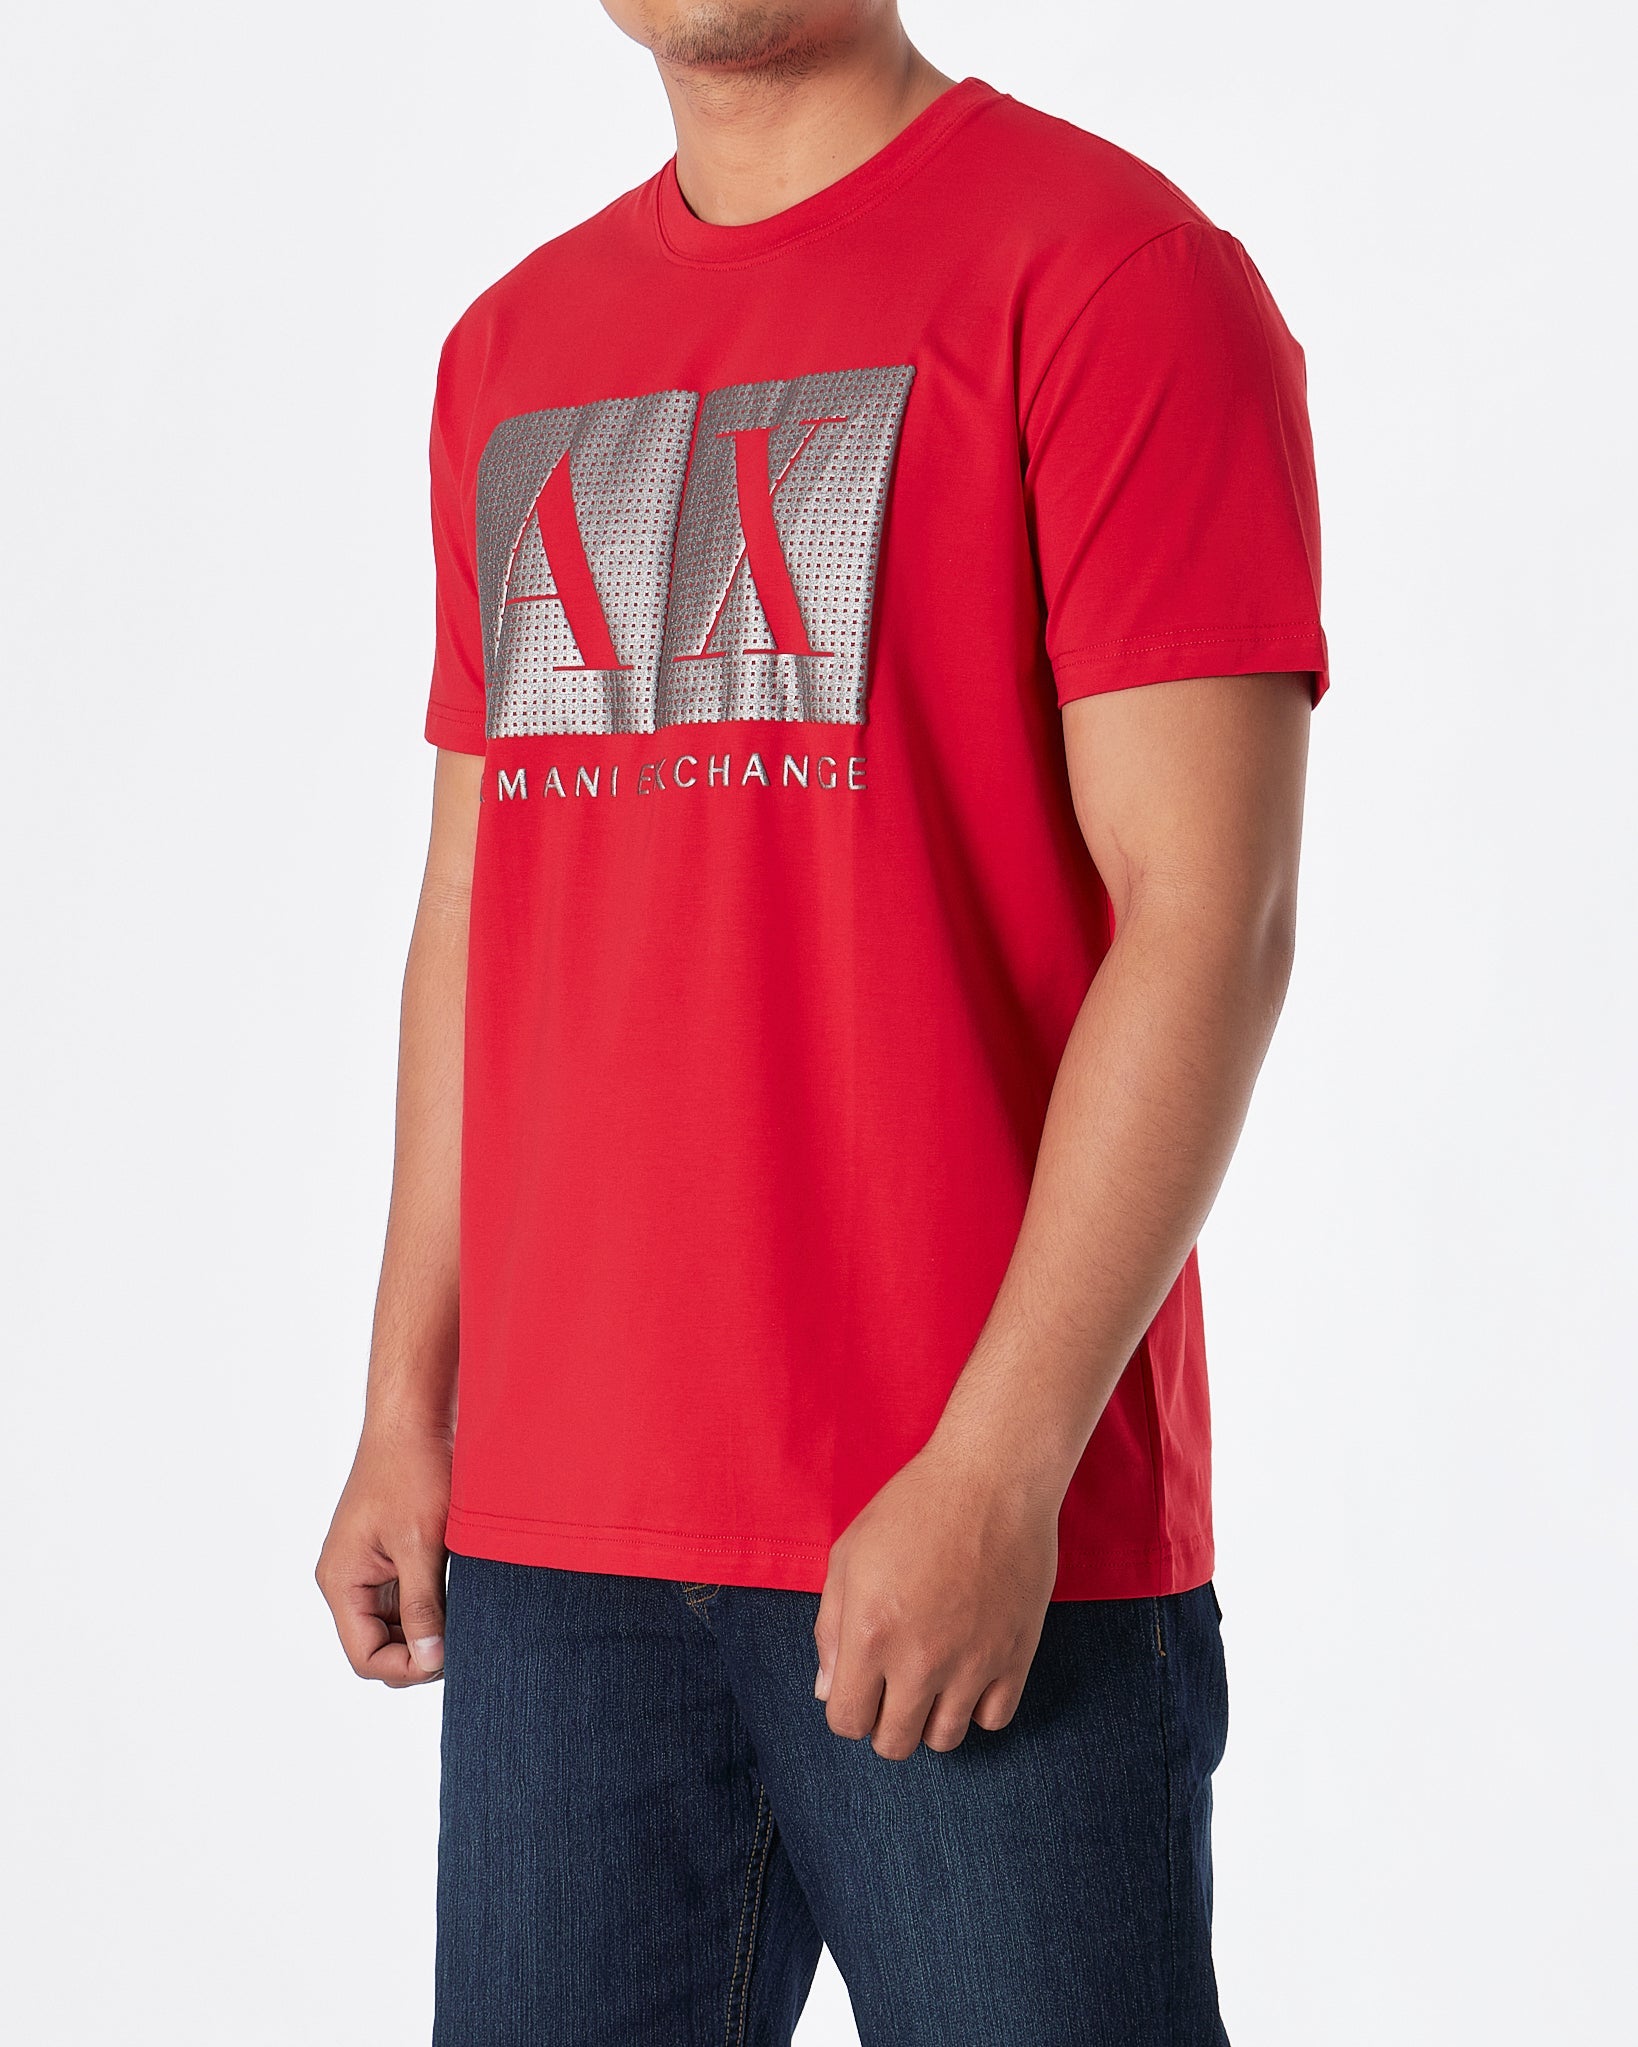 MOI OUTFIT-ARM Exchange Men Red T-Shirt 17.90